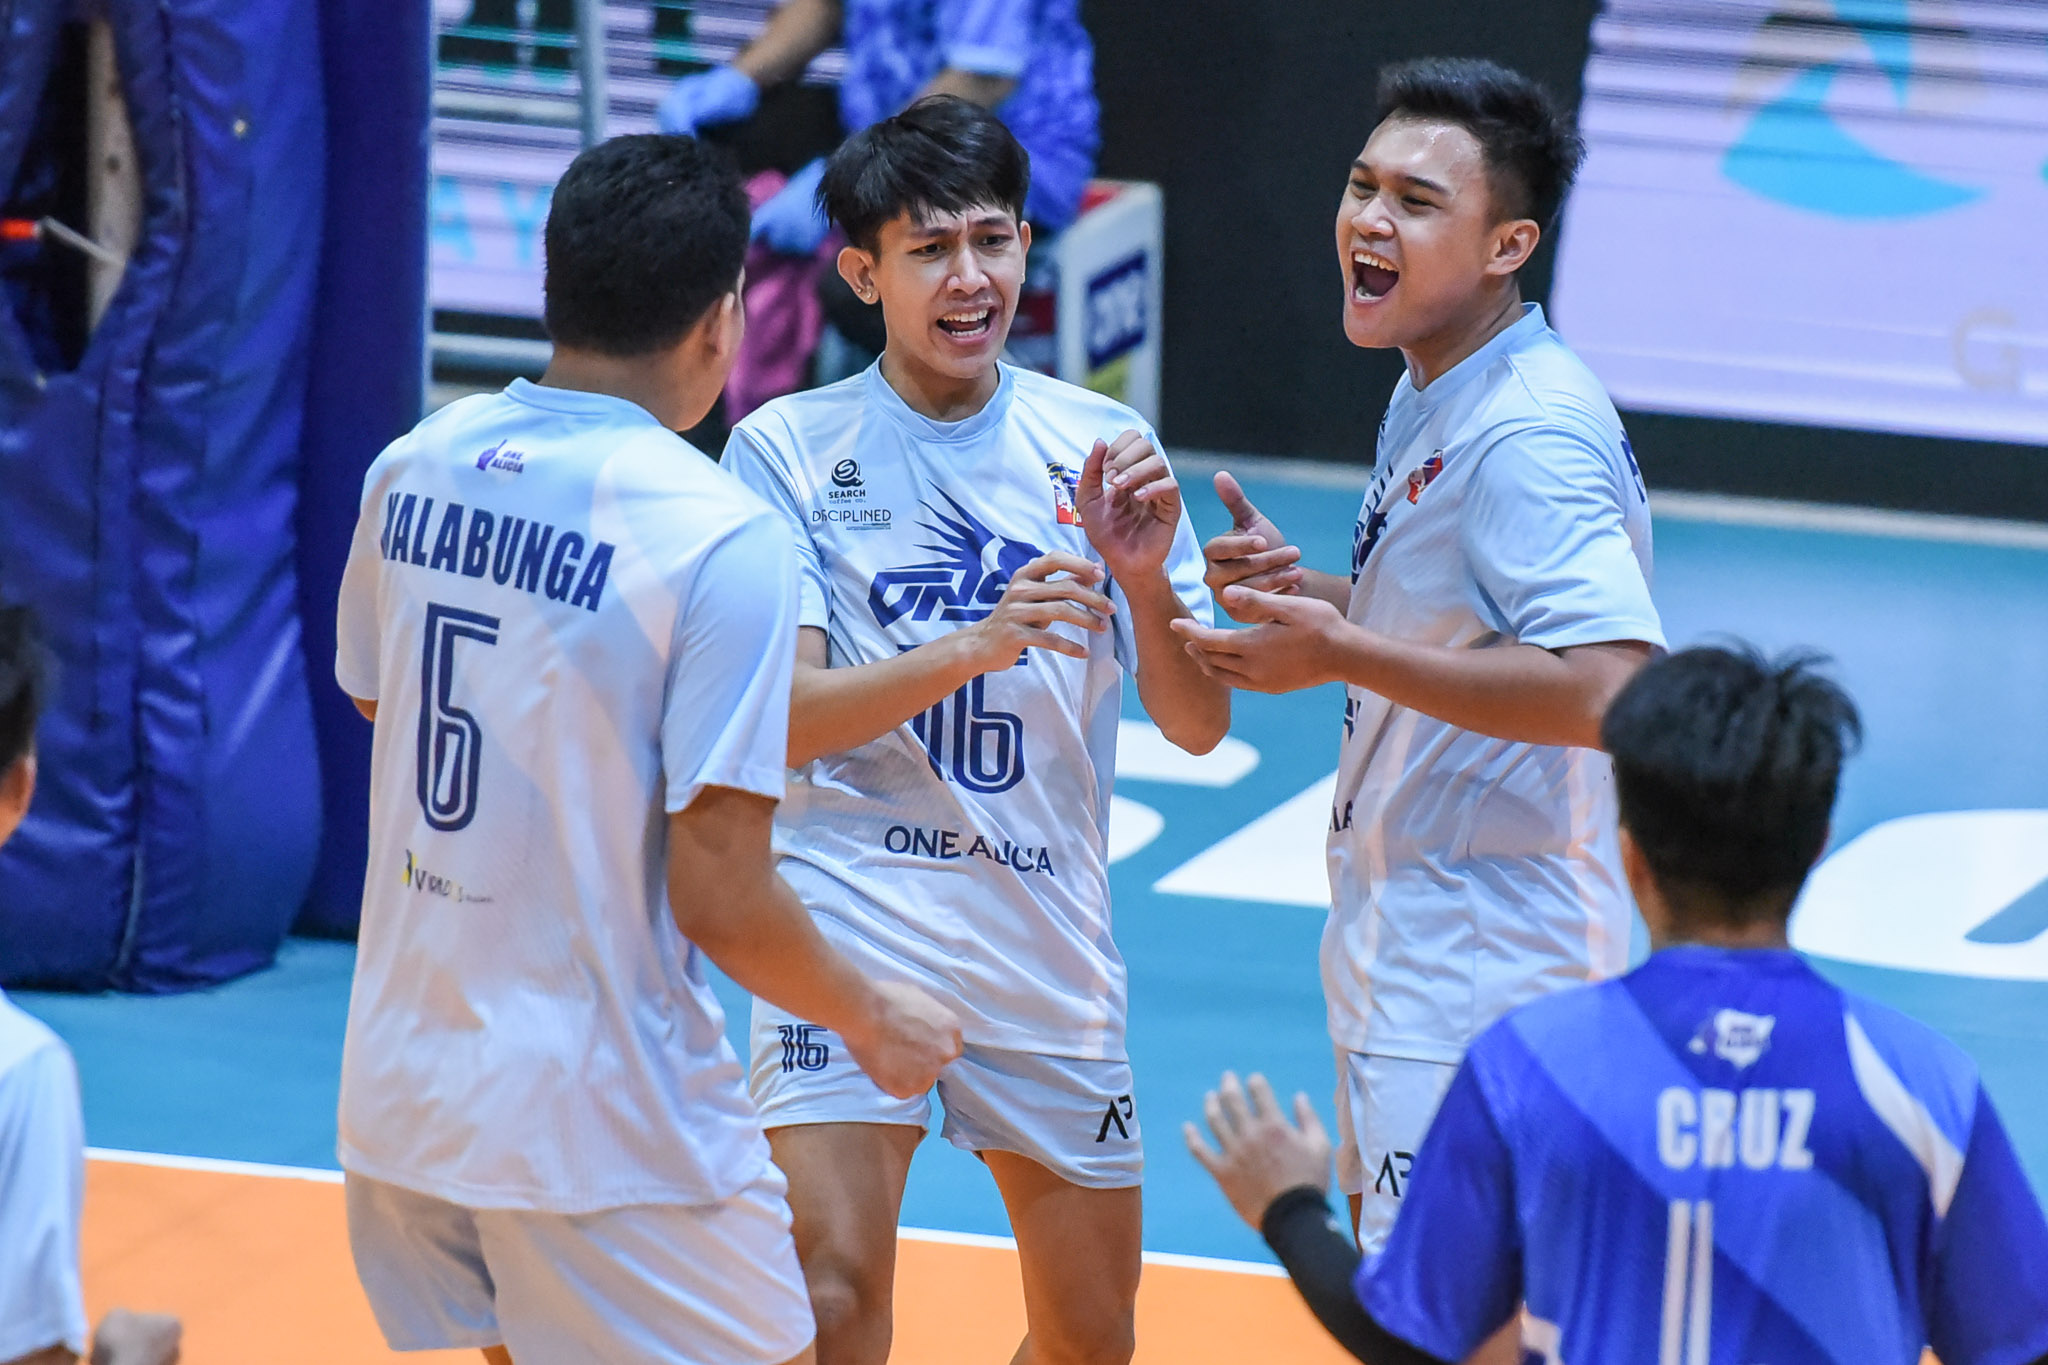 Spikers-Turf-Army-vs.-VNS-Kevin-Montemayor-1761 Best yet to come for VNS's Kevin Montemayor News Spikers' Turf Volleyball  - philippine sports news